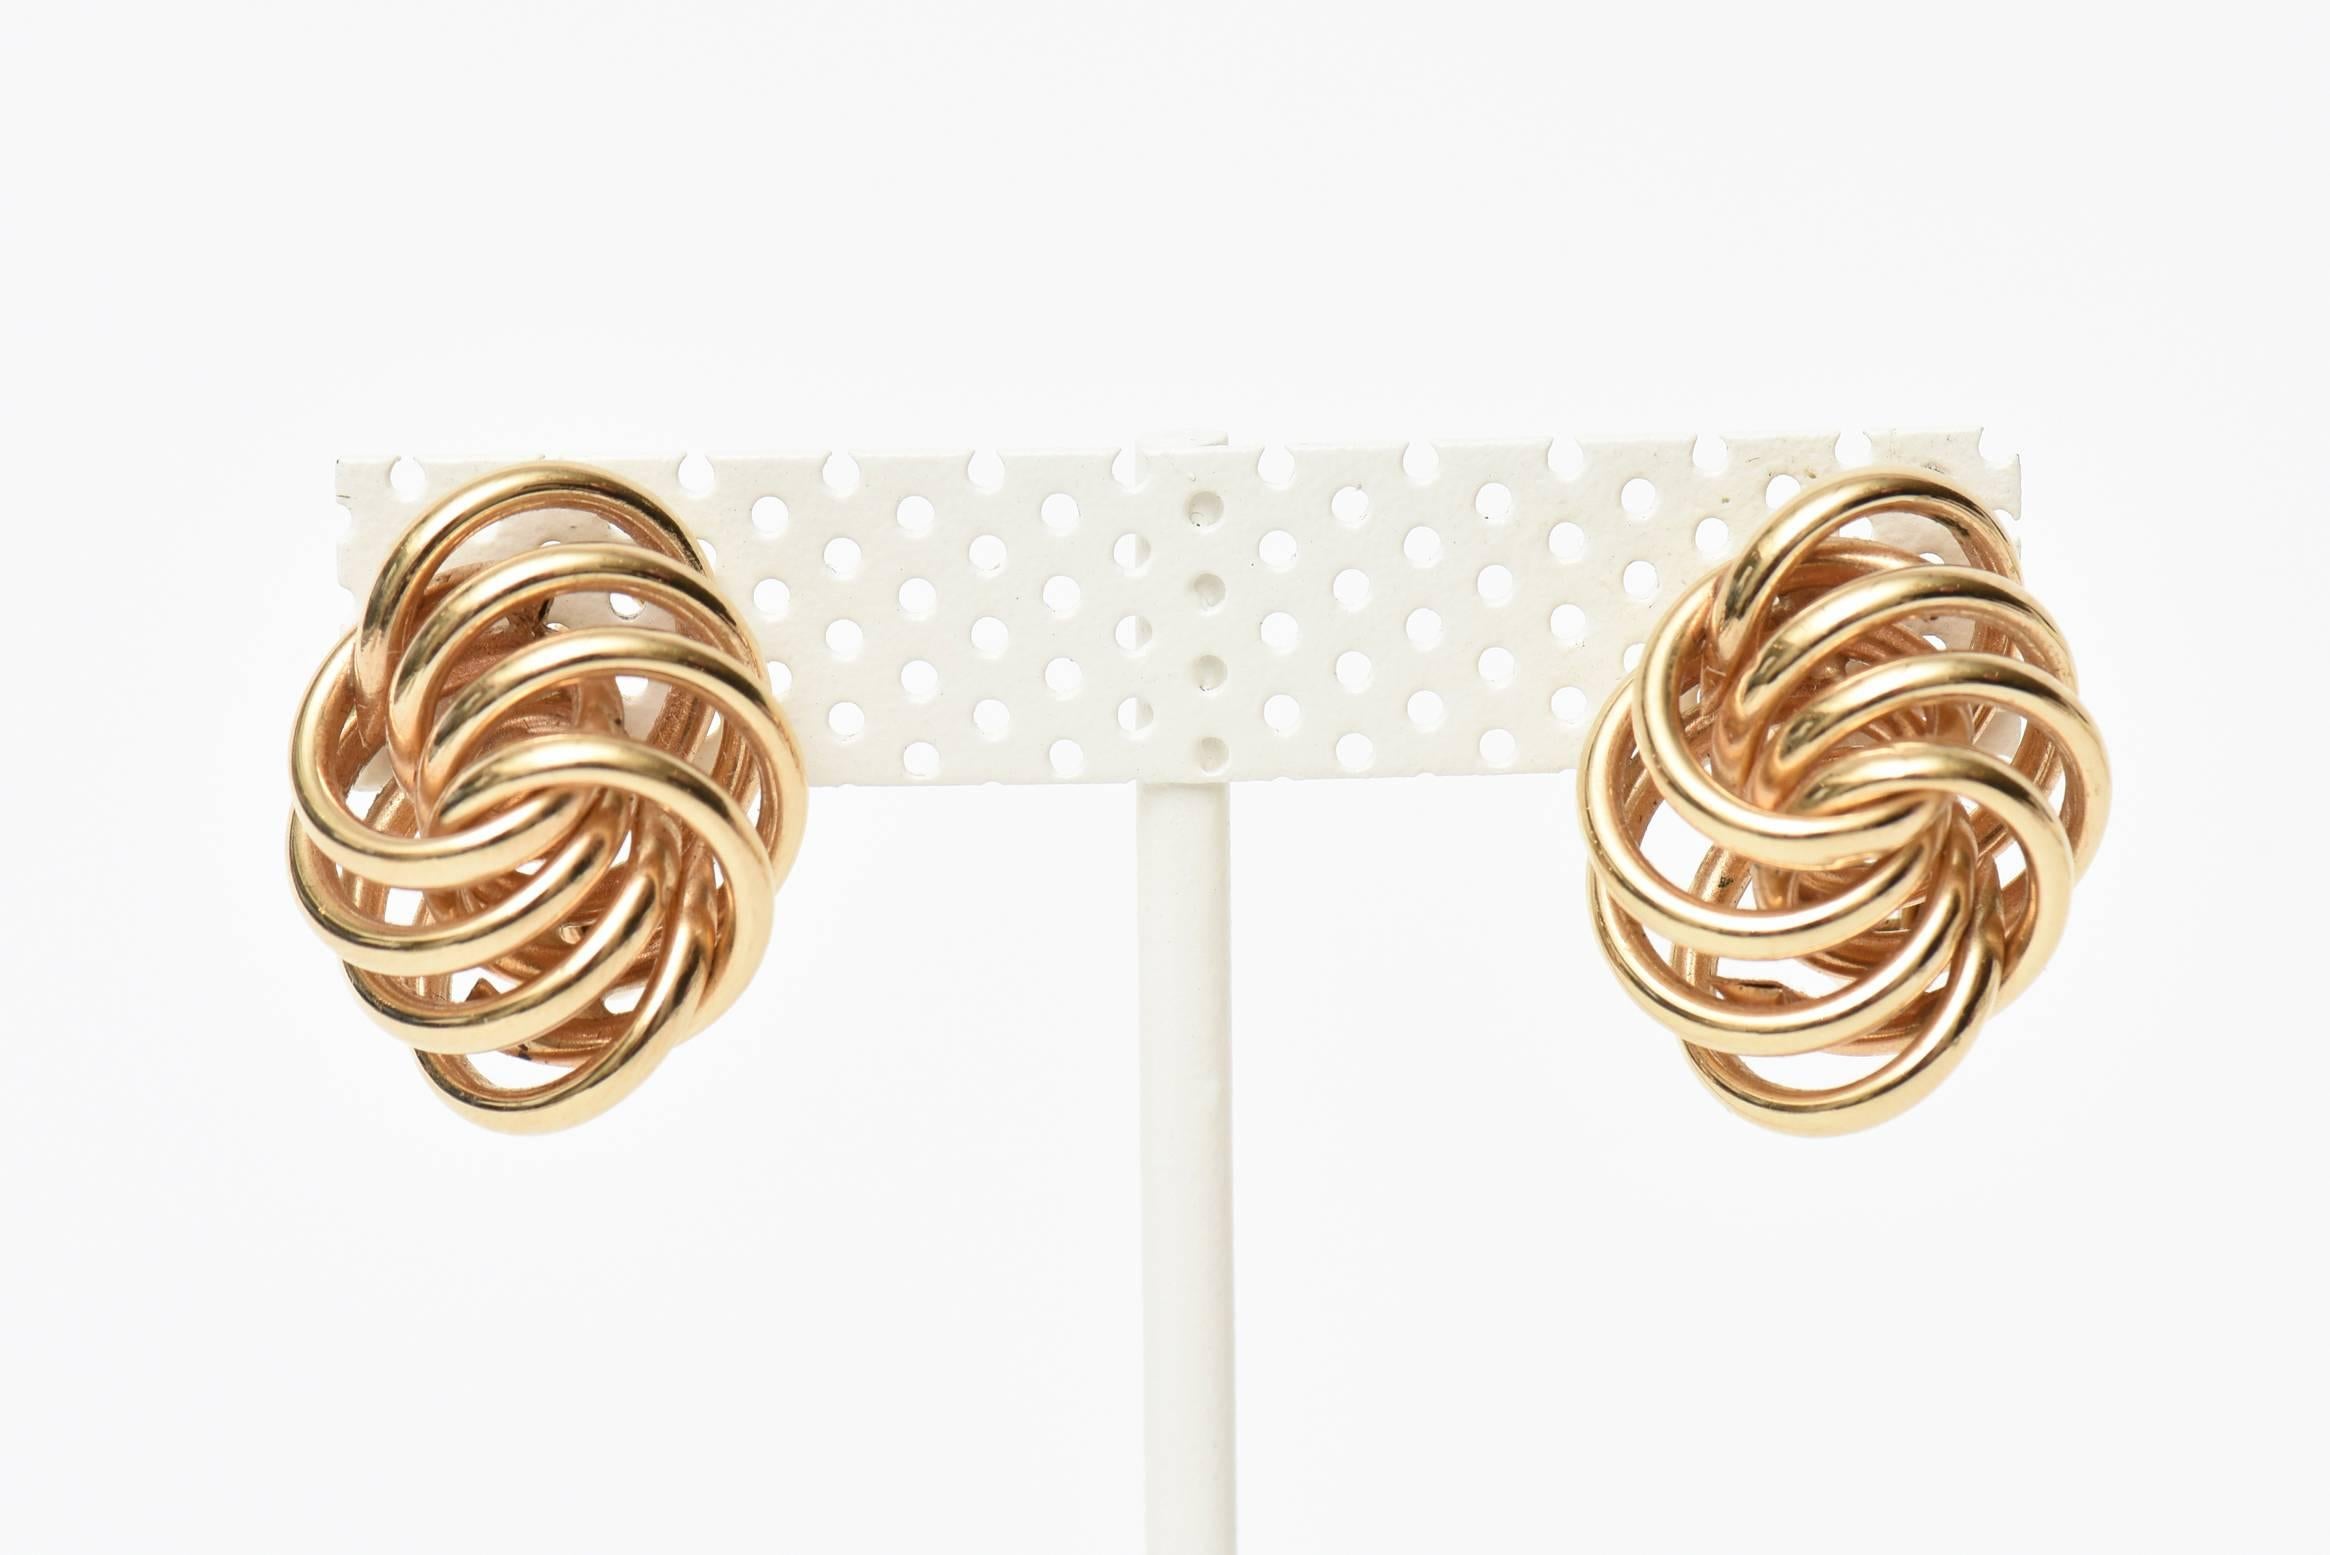 These lovely vintage 14K gold earrings have both a sculptural form. The concentric circles overlapping of gold that are layered go in and out almost form a shape of a knot. On the ear lobe, they have dimension and jut out to the side. Very